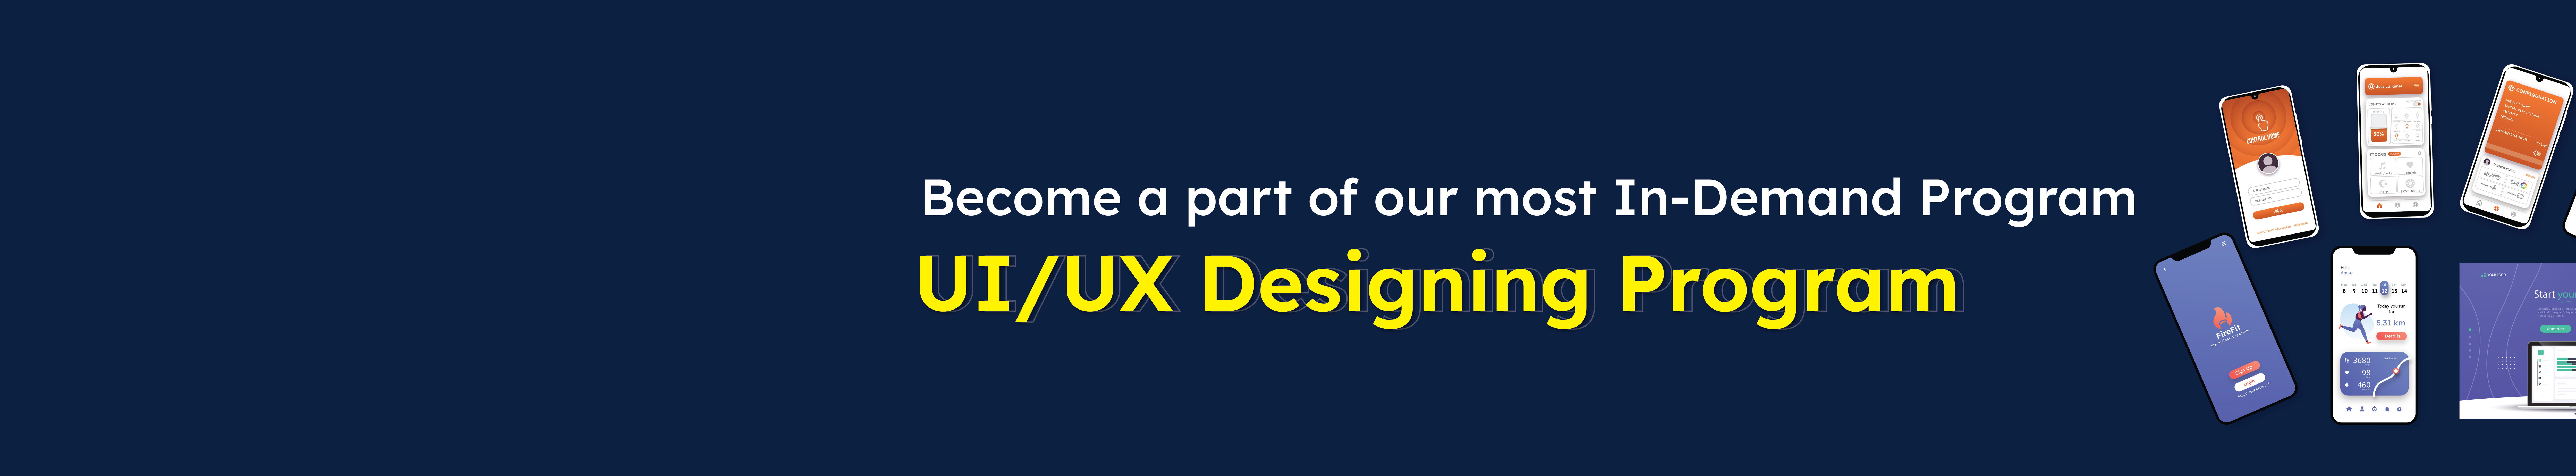 UIUX GLOBAL OFFICIAL's profile banner